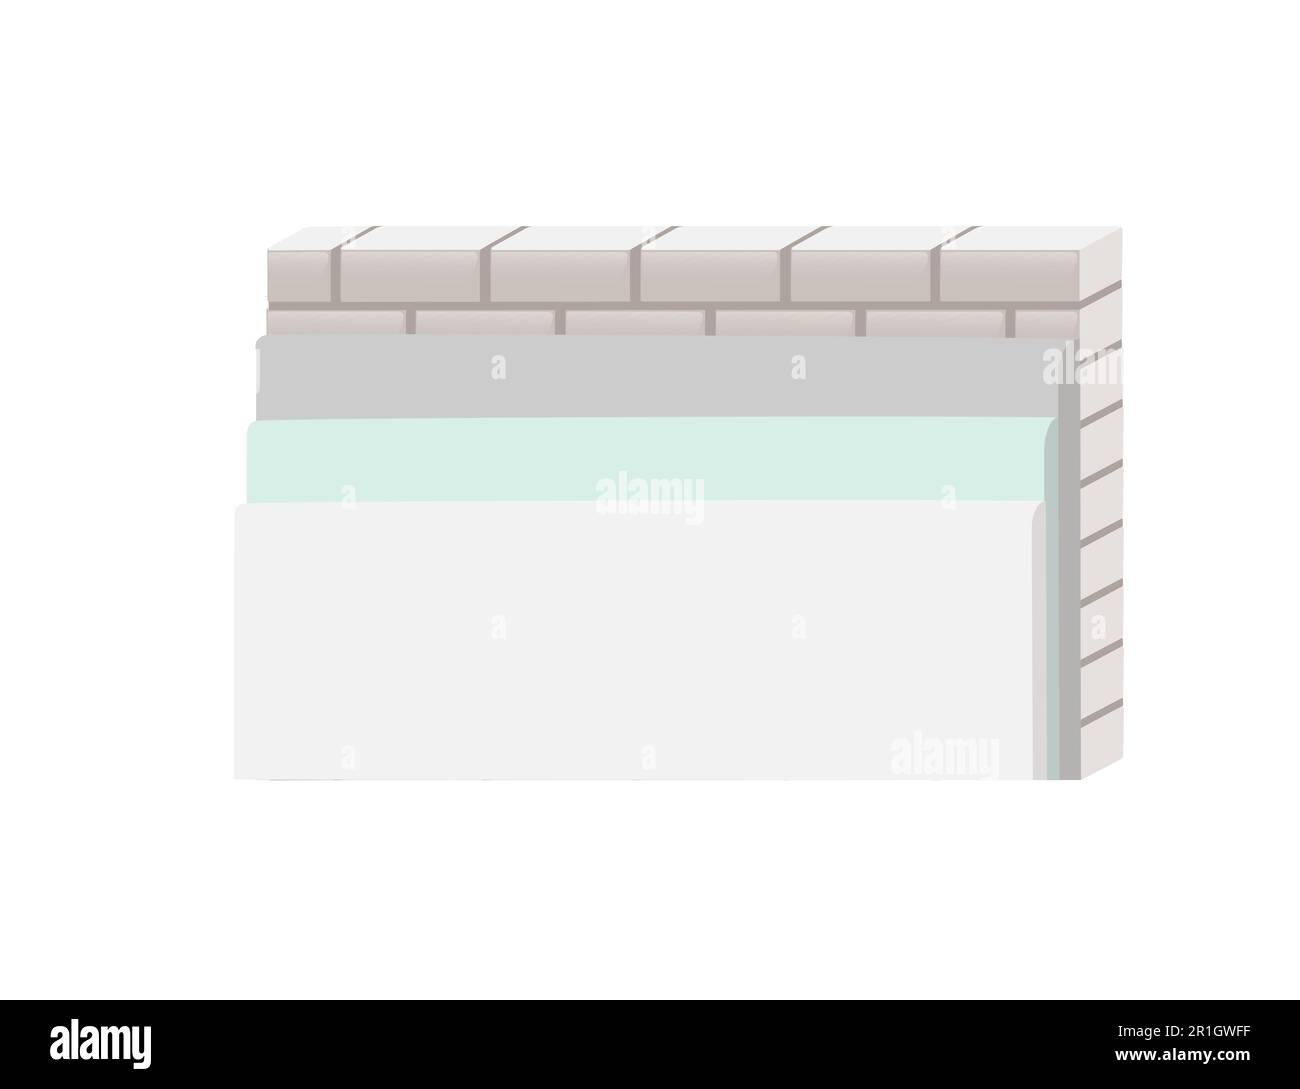 Brick bearing wall with insulated layers and cladding vector illustration isolated on white background Stock Vector